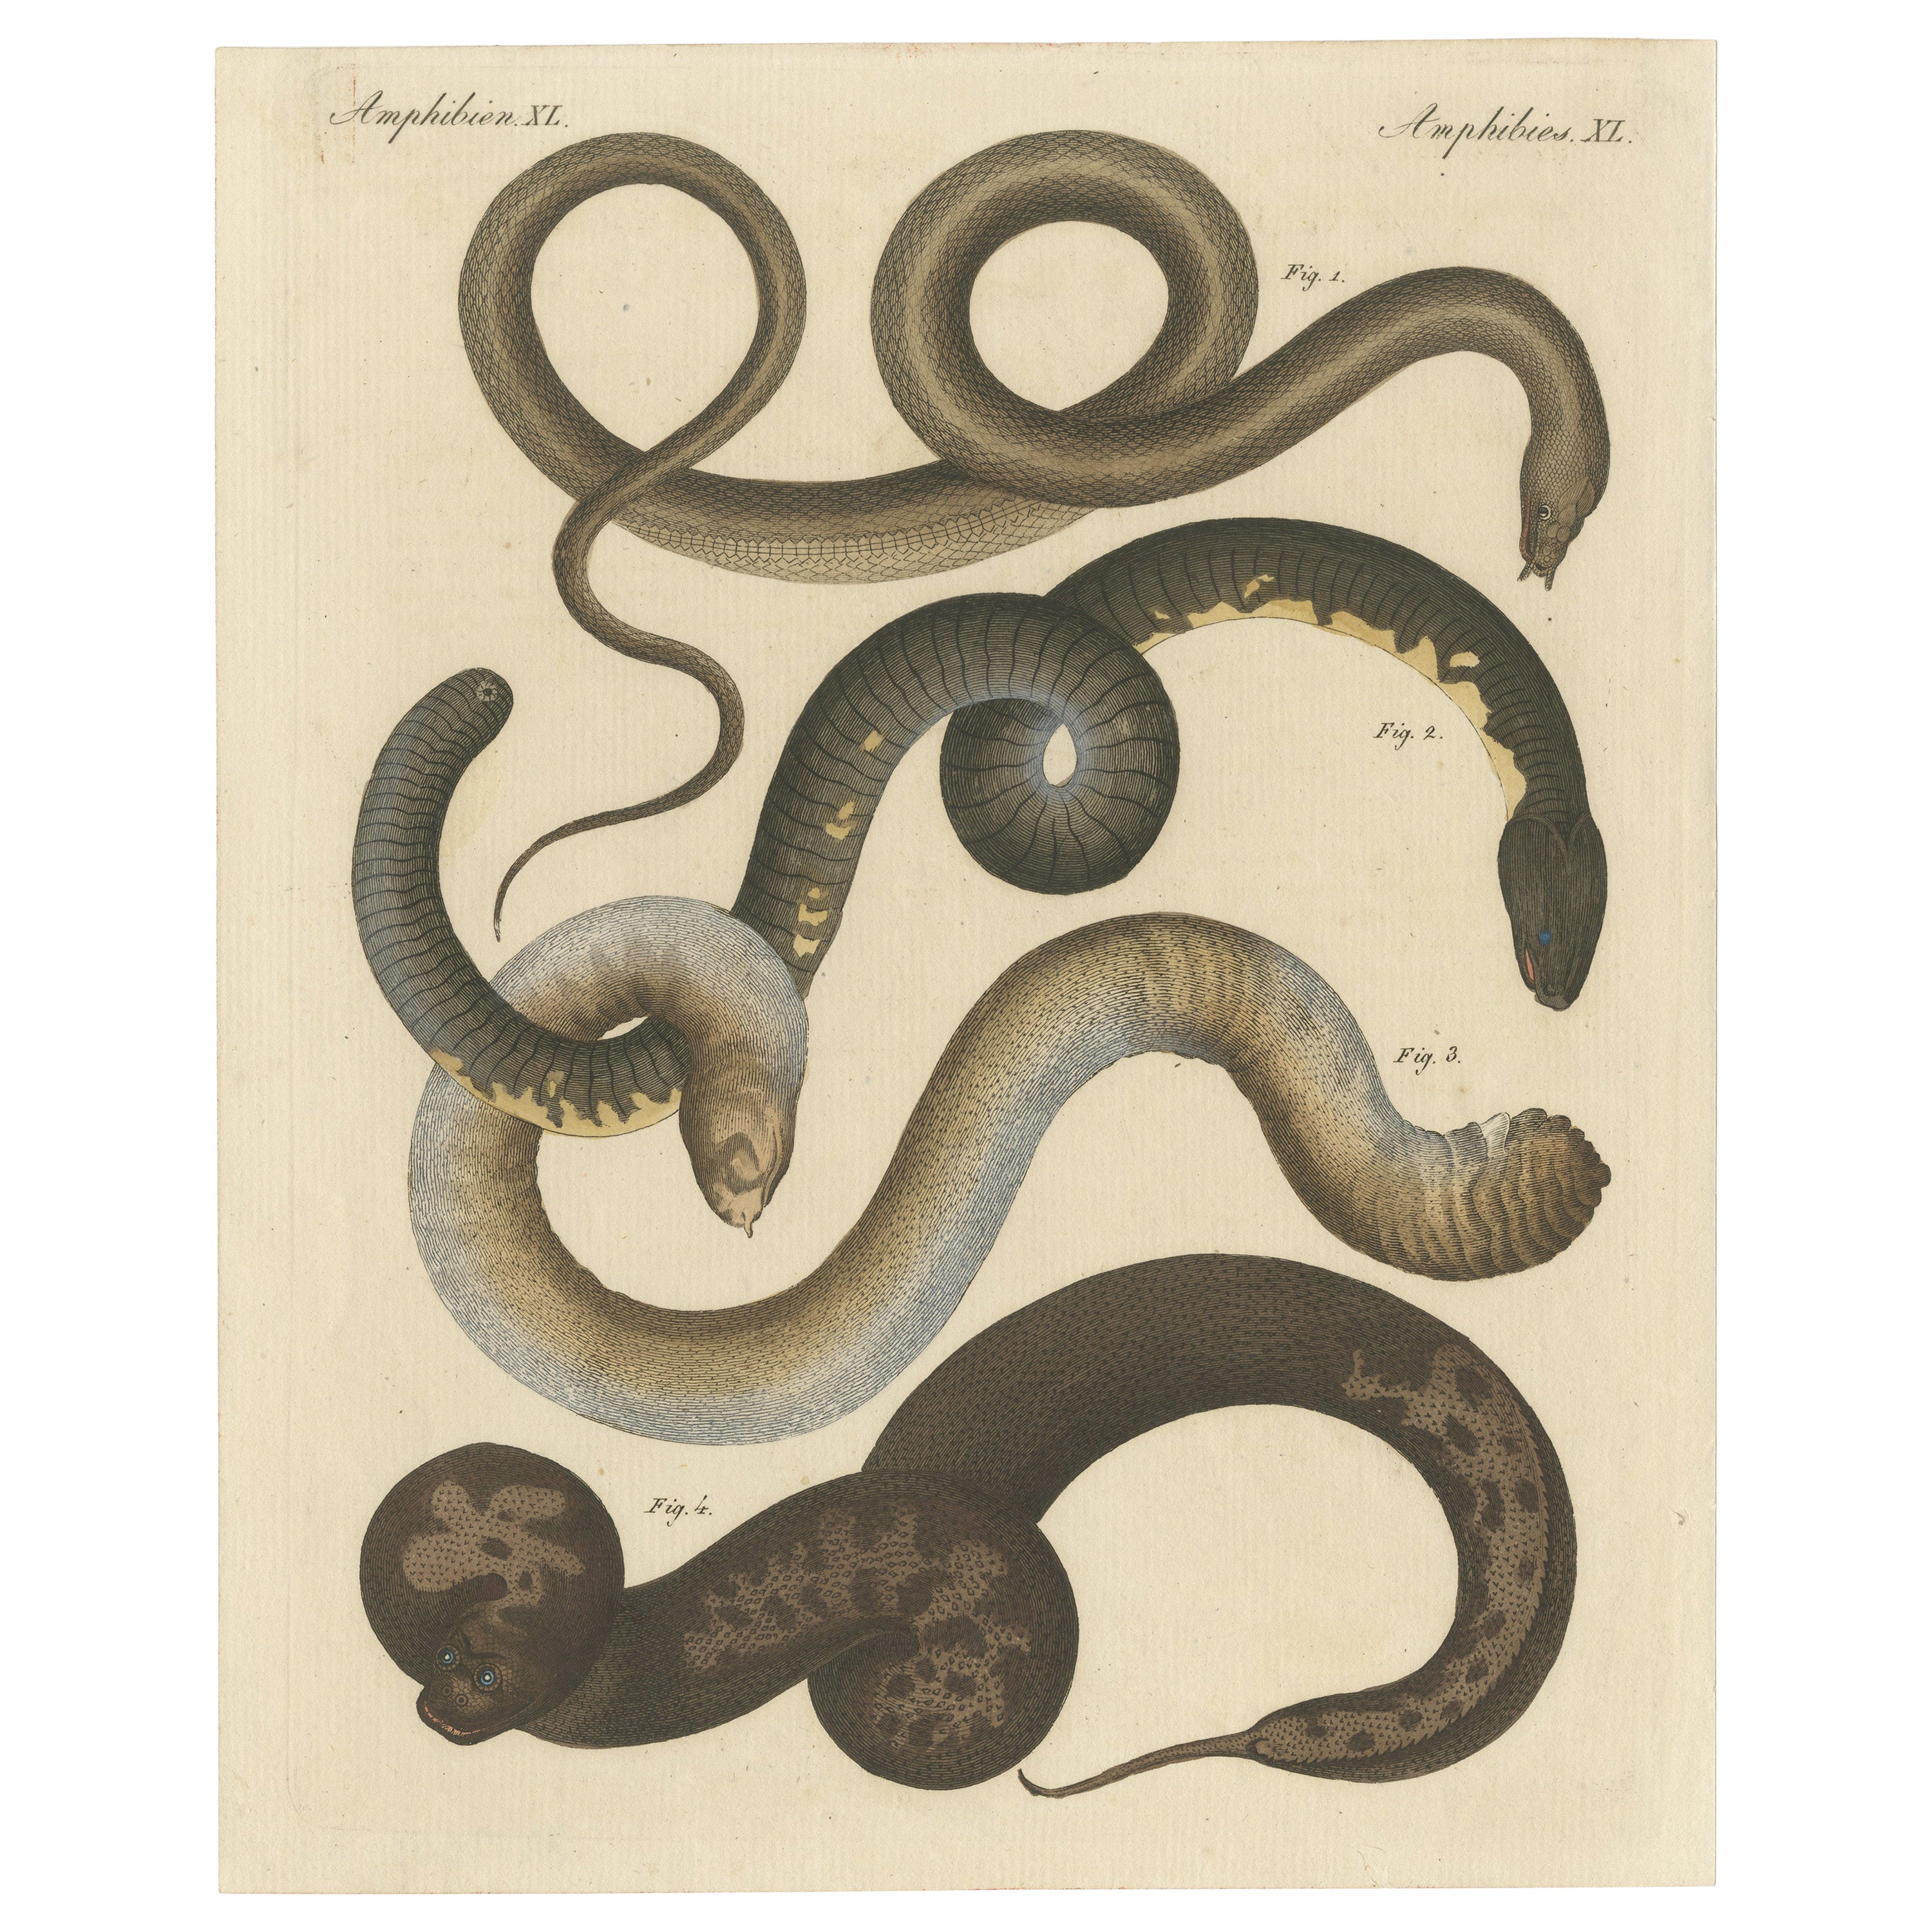 Original Antique Print of Various Snakes and Caecilian Species For Sale